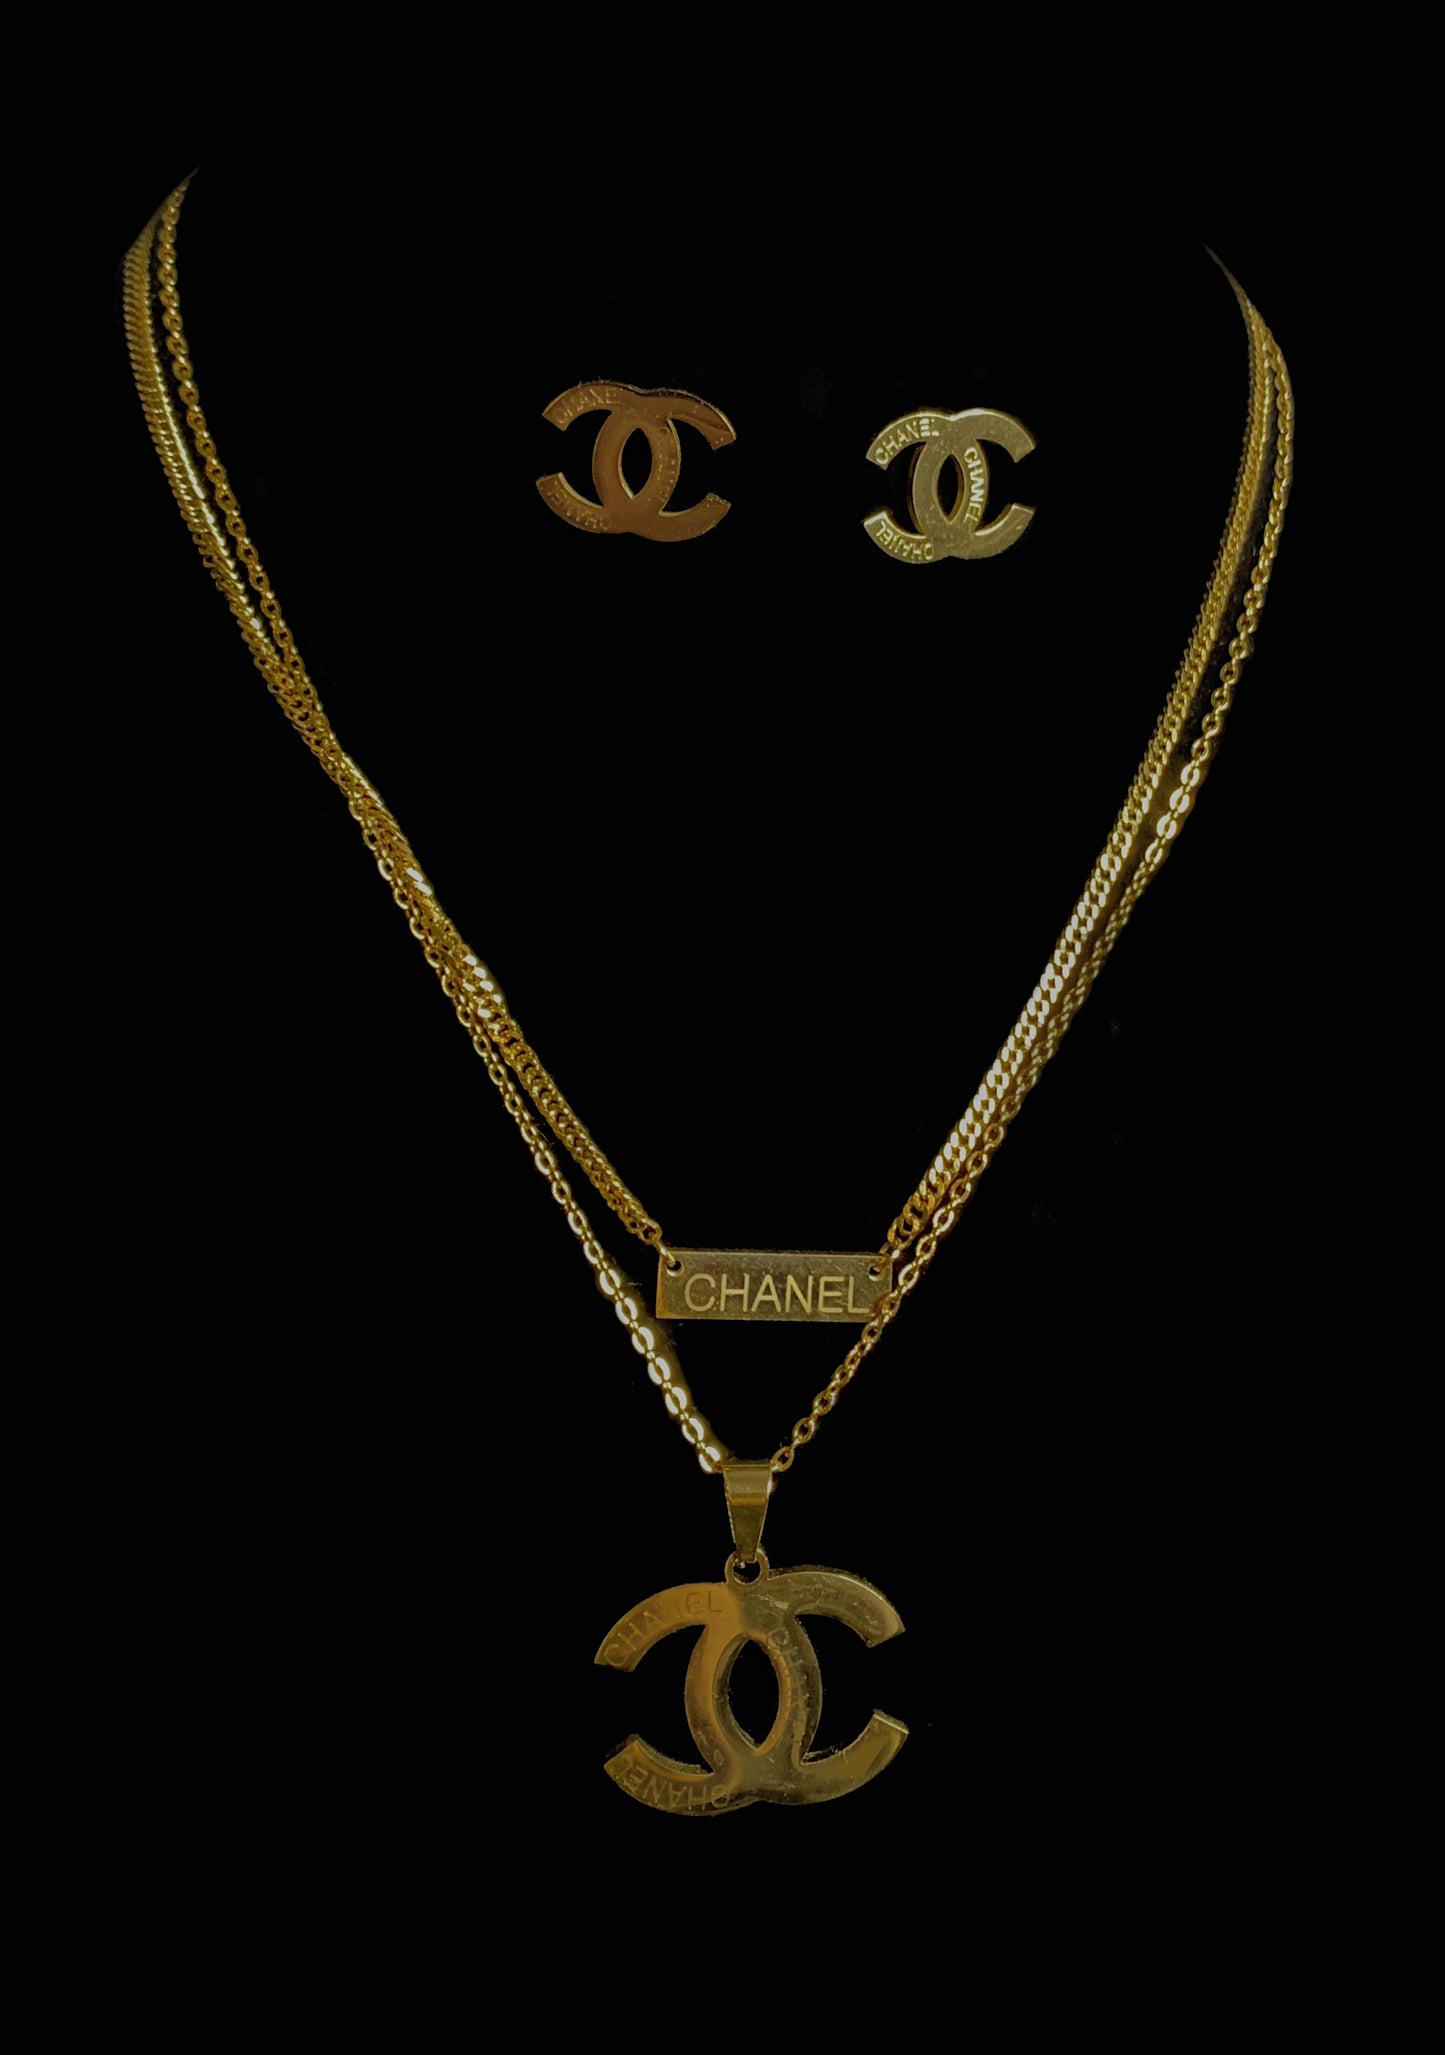 Chanel Inspired Jewelry Set – ItsGoldenPiece Boutique LLC